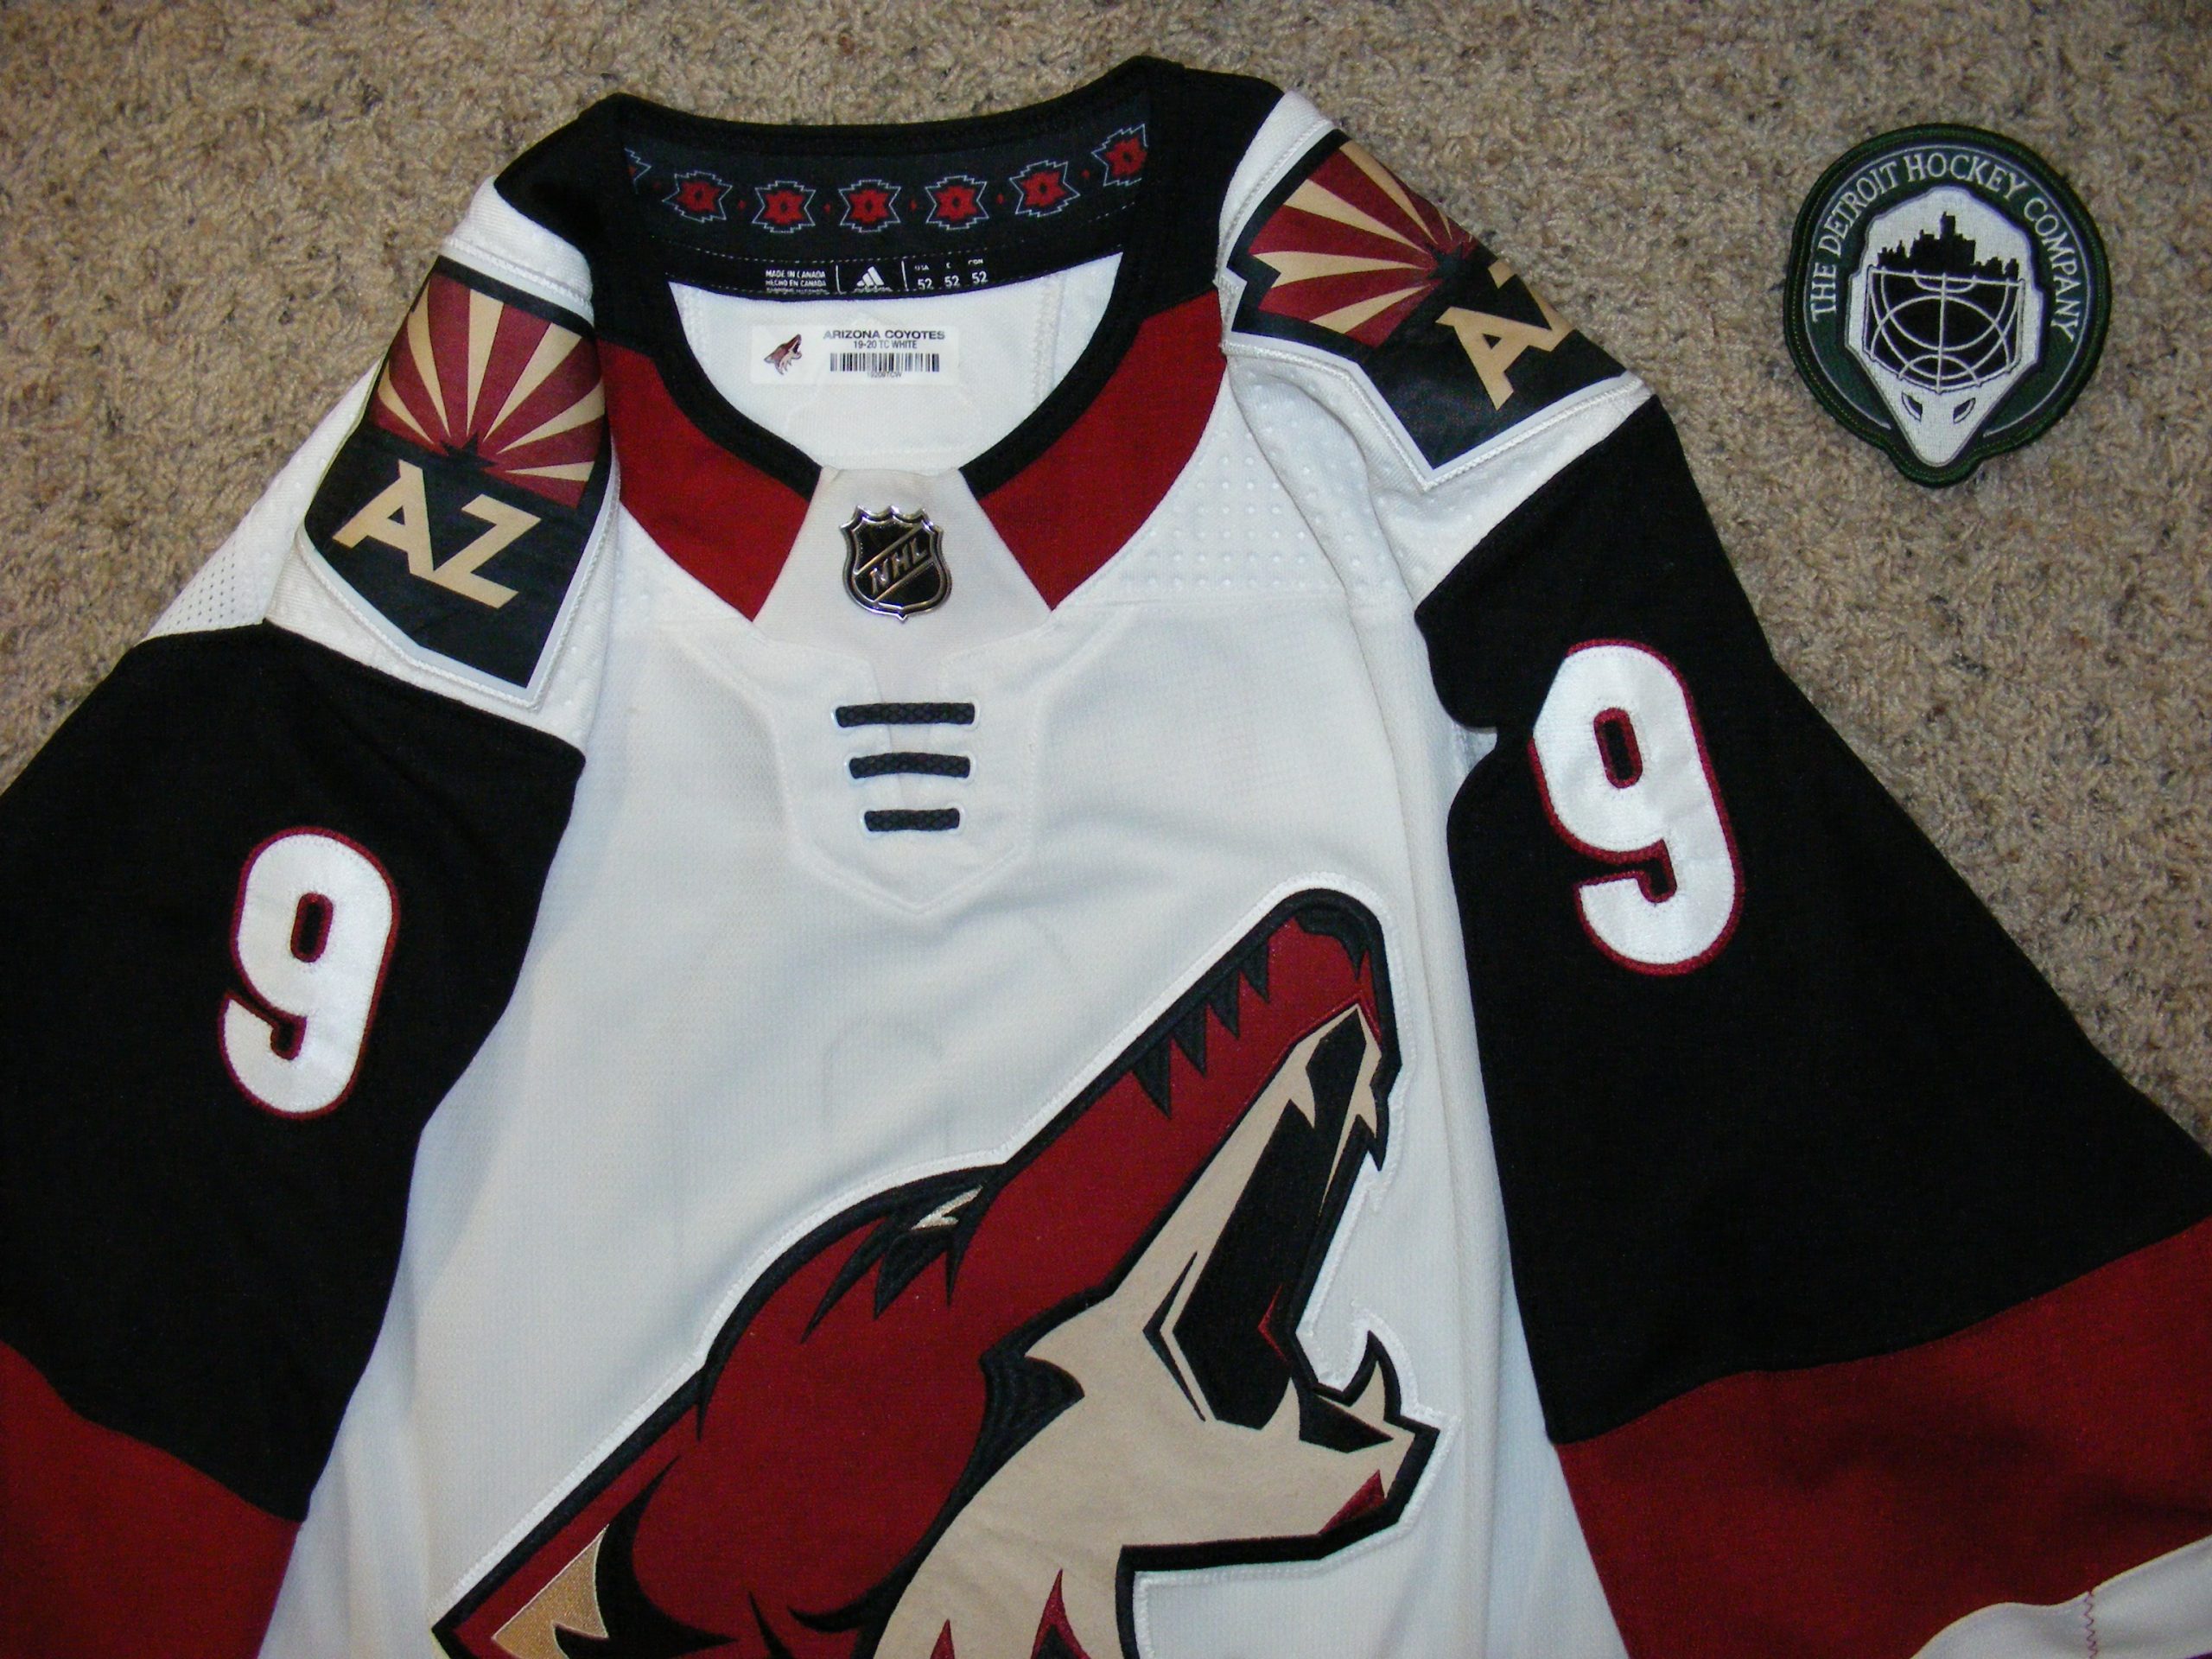 Utah Grizzlies (ECHL) 19-20 Jerseys. Definitly going to have to